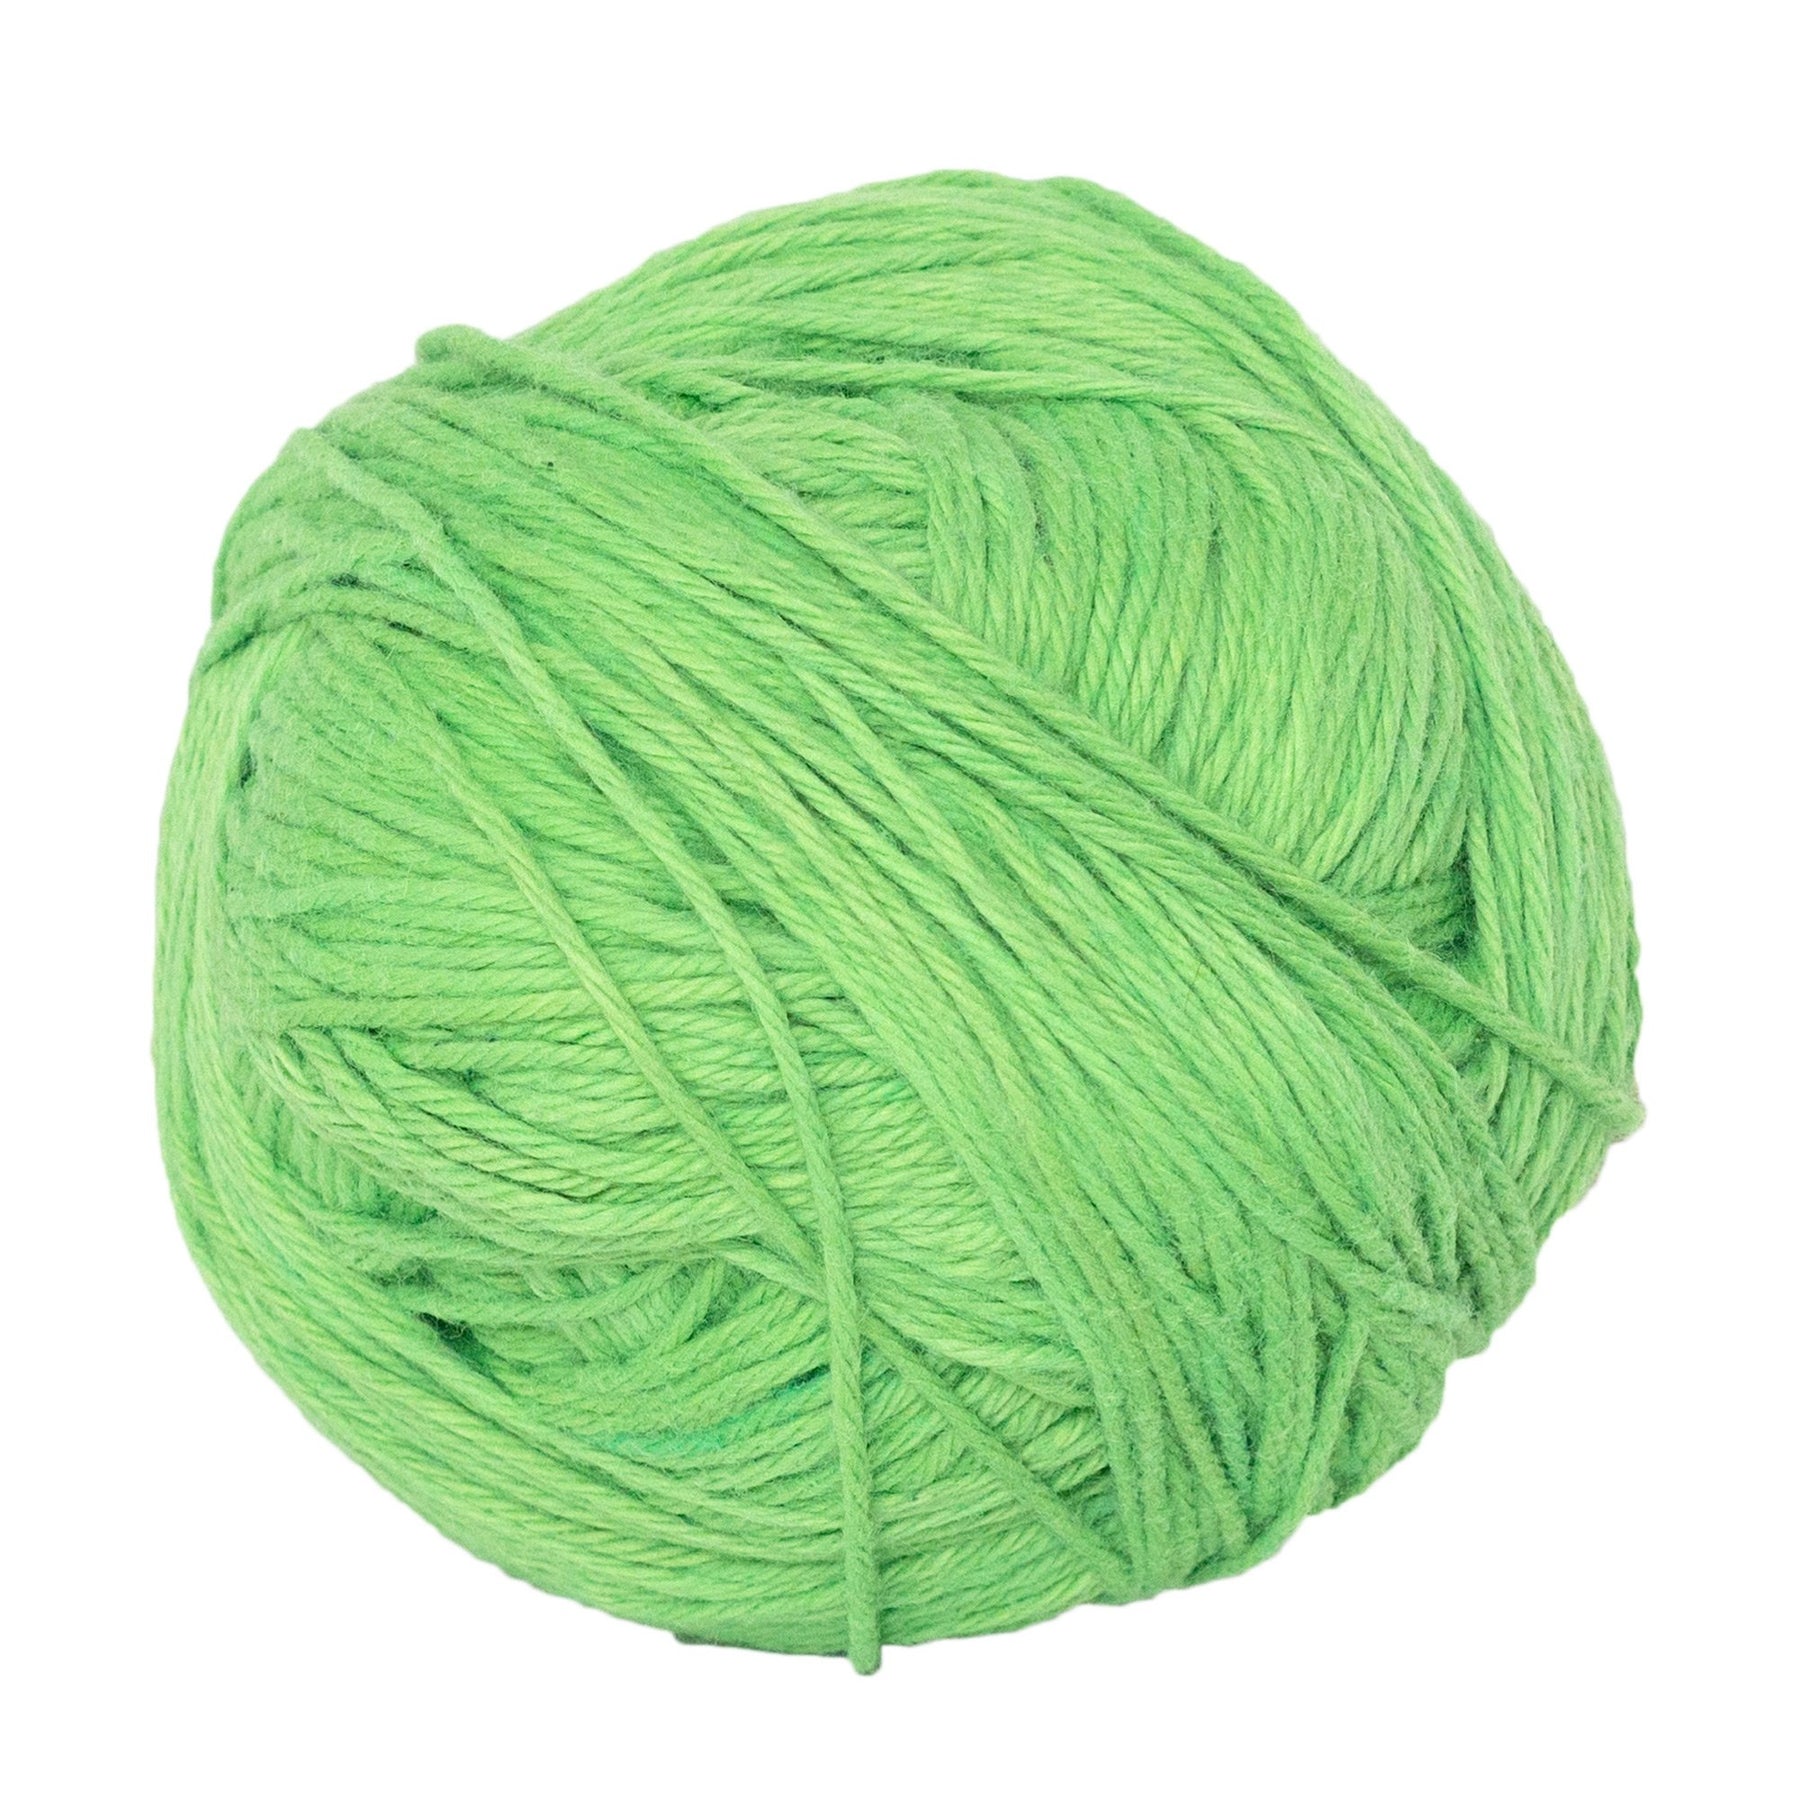 <span class='sale-tag '>Sale!</span> Green Yarn Ball - Naturally Dyed Organic Cotton - assorted hues